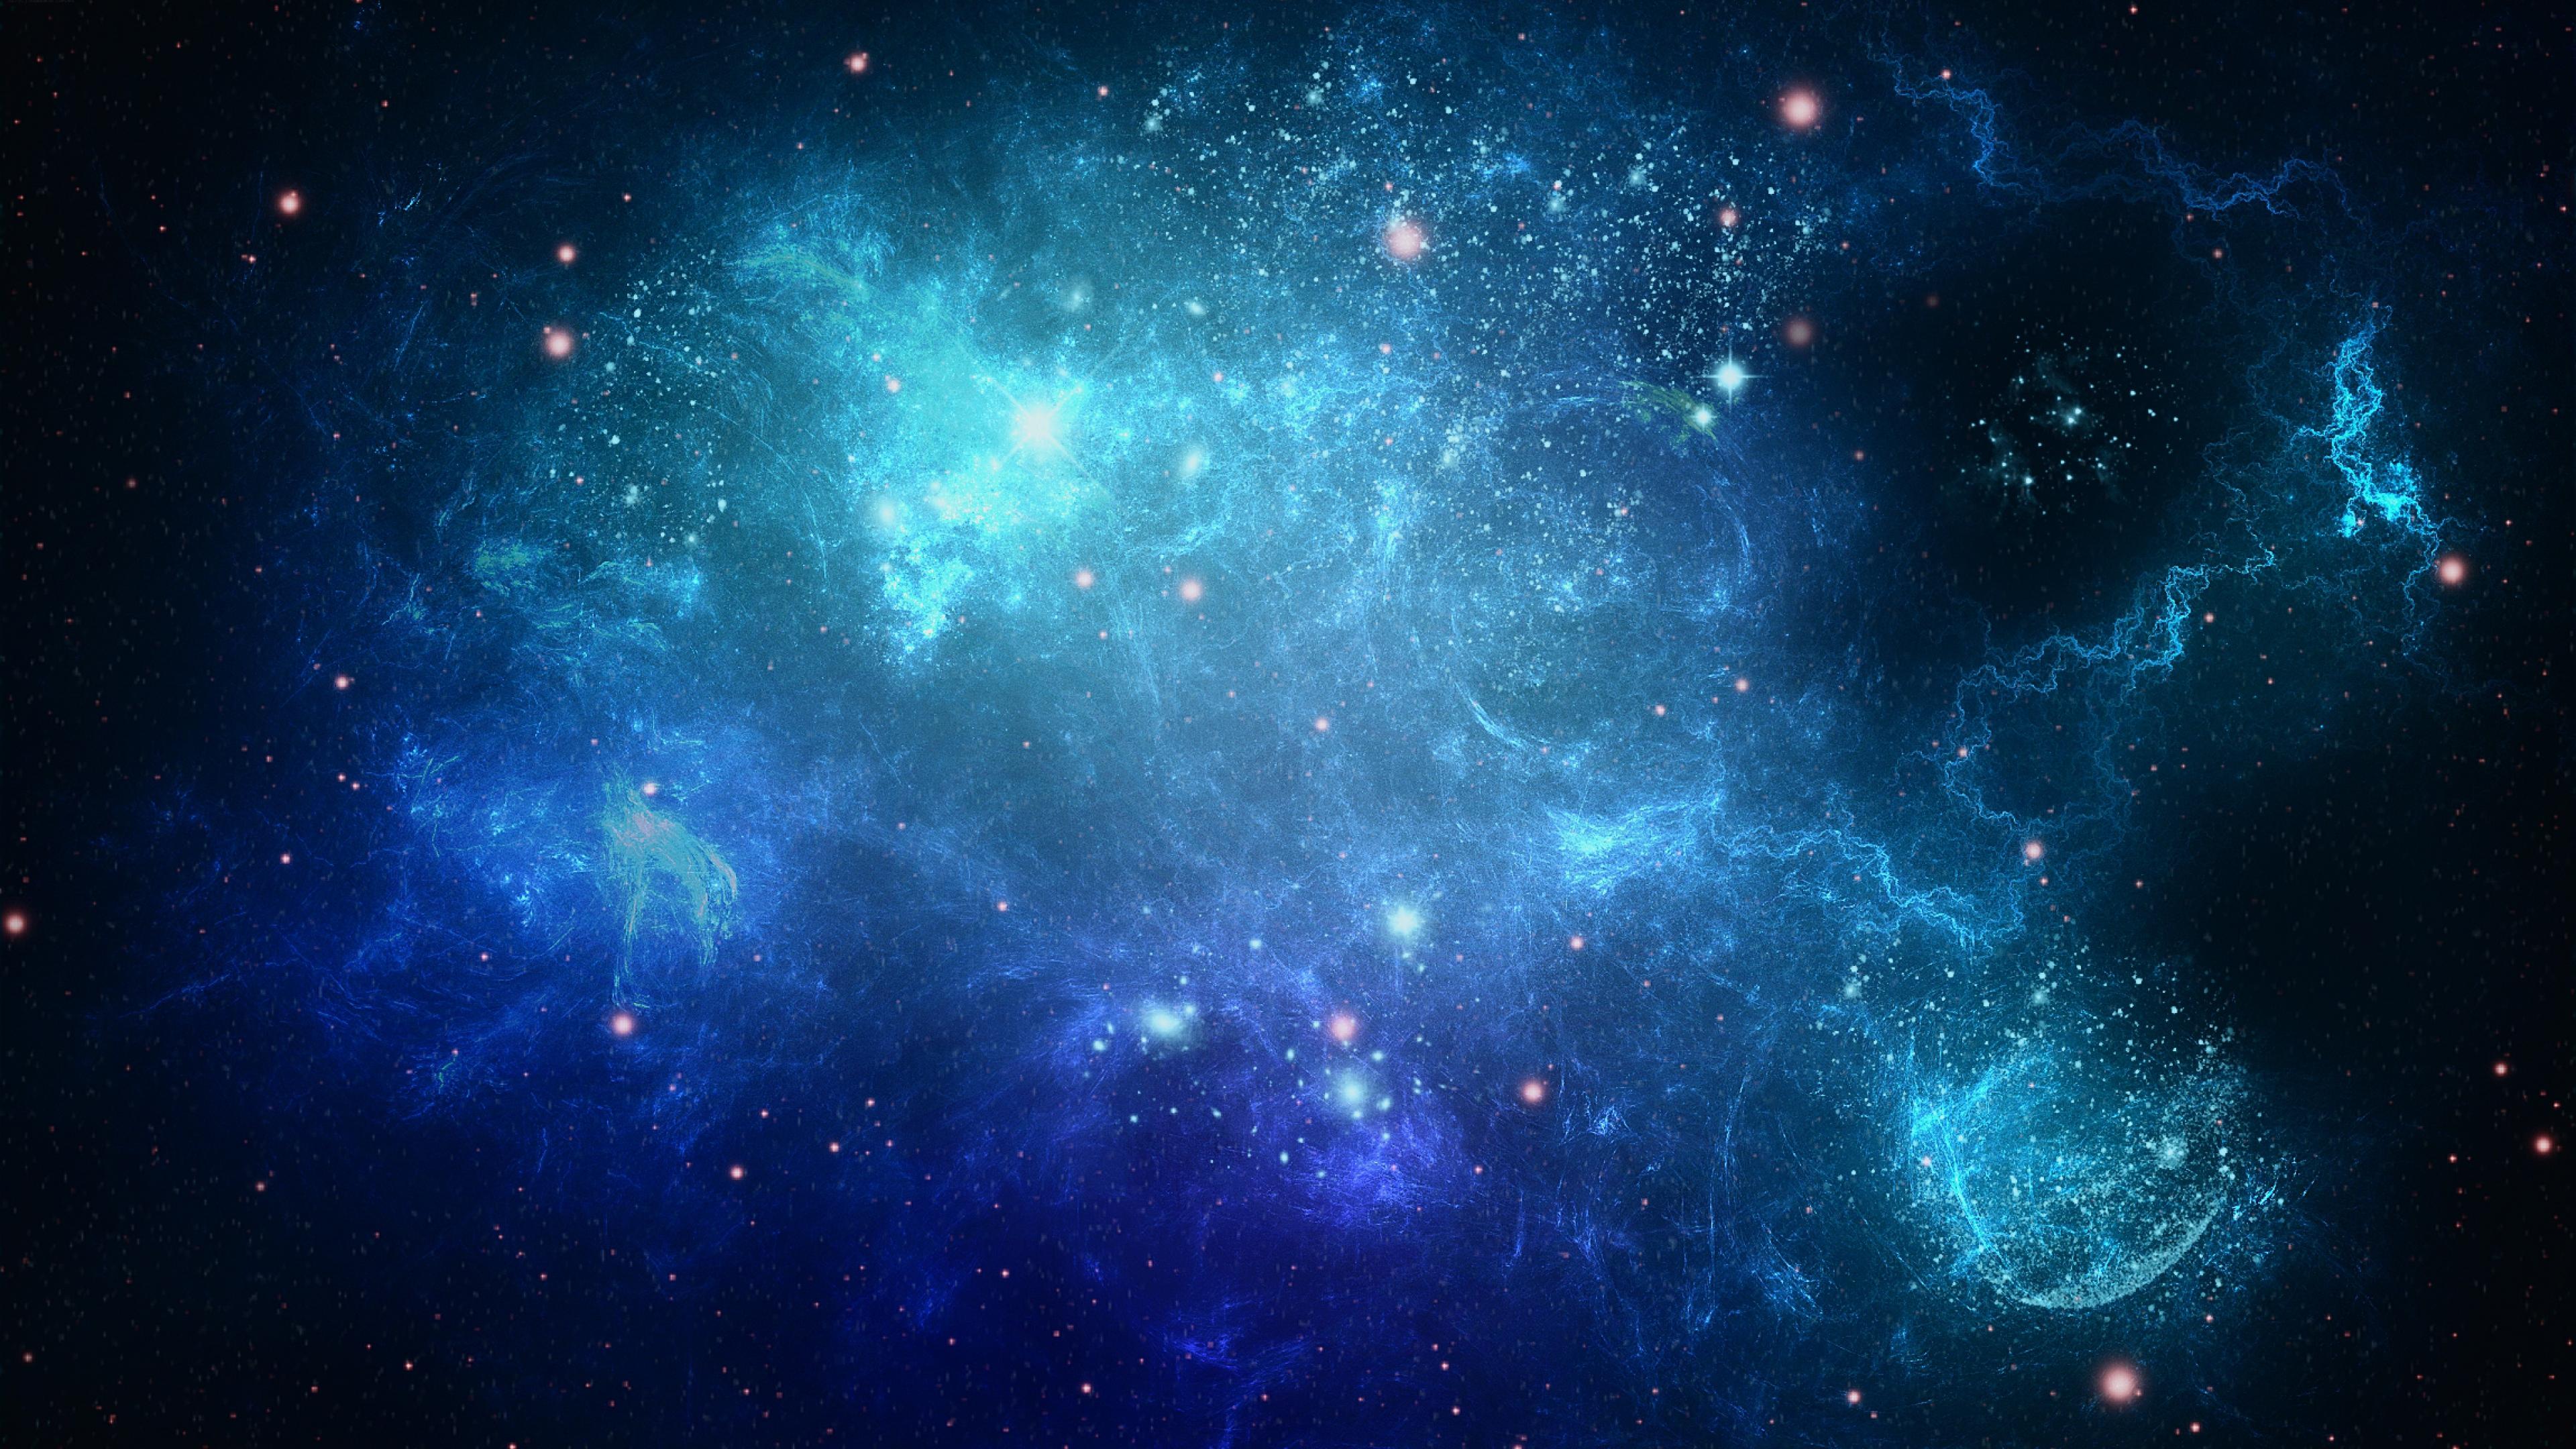 Get lost in space with an out of this world wallpaper!